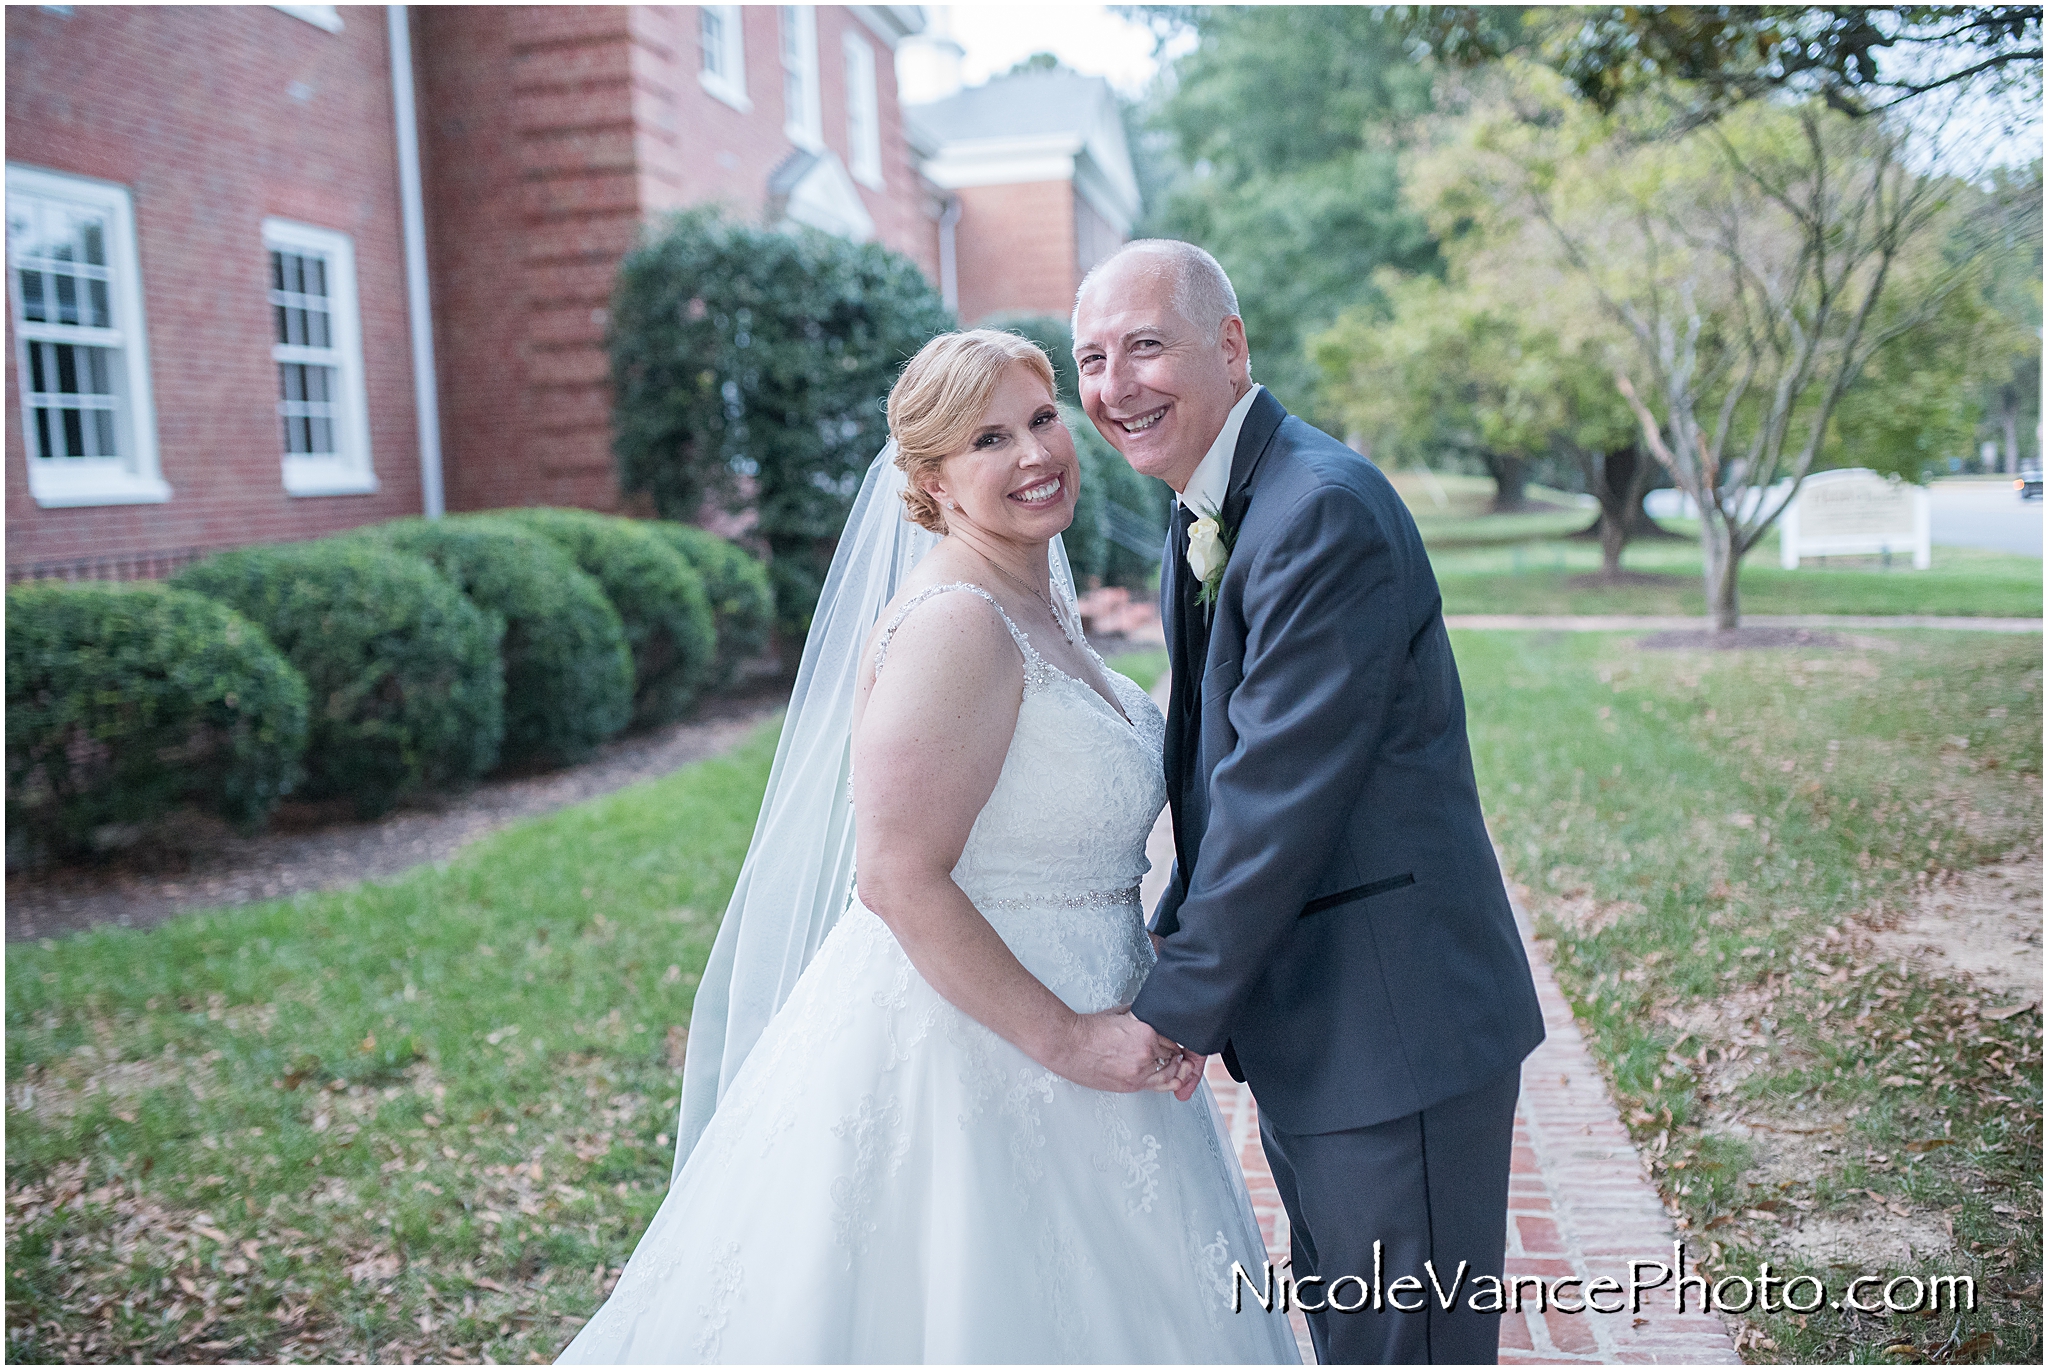 Bride and groom portraits at Third Church.